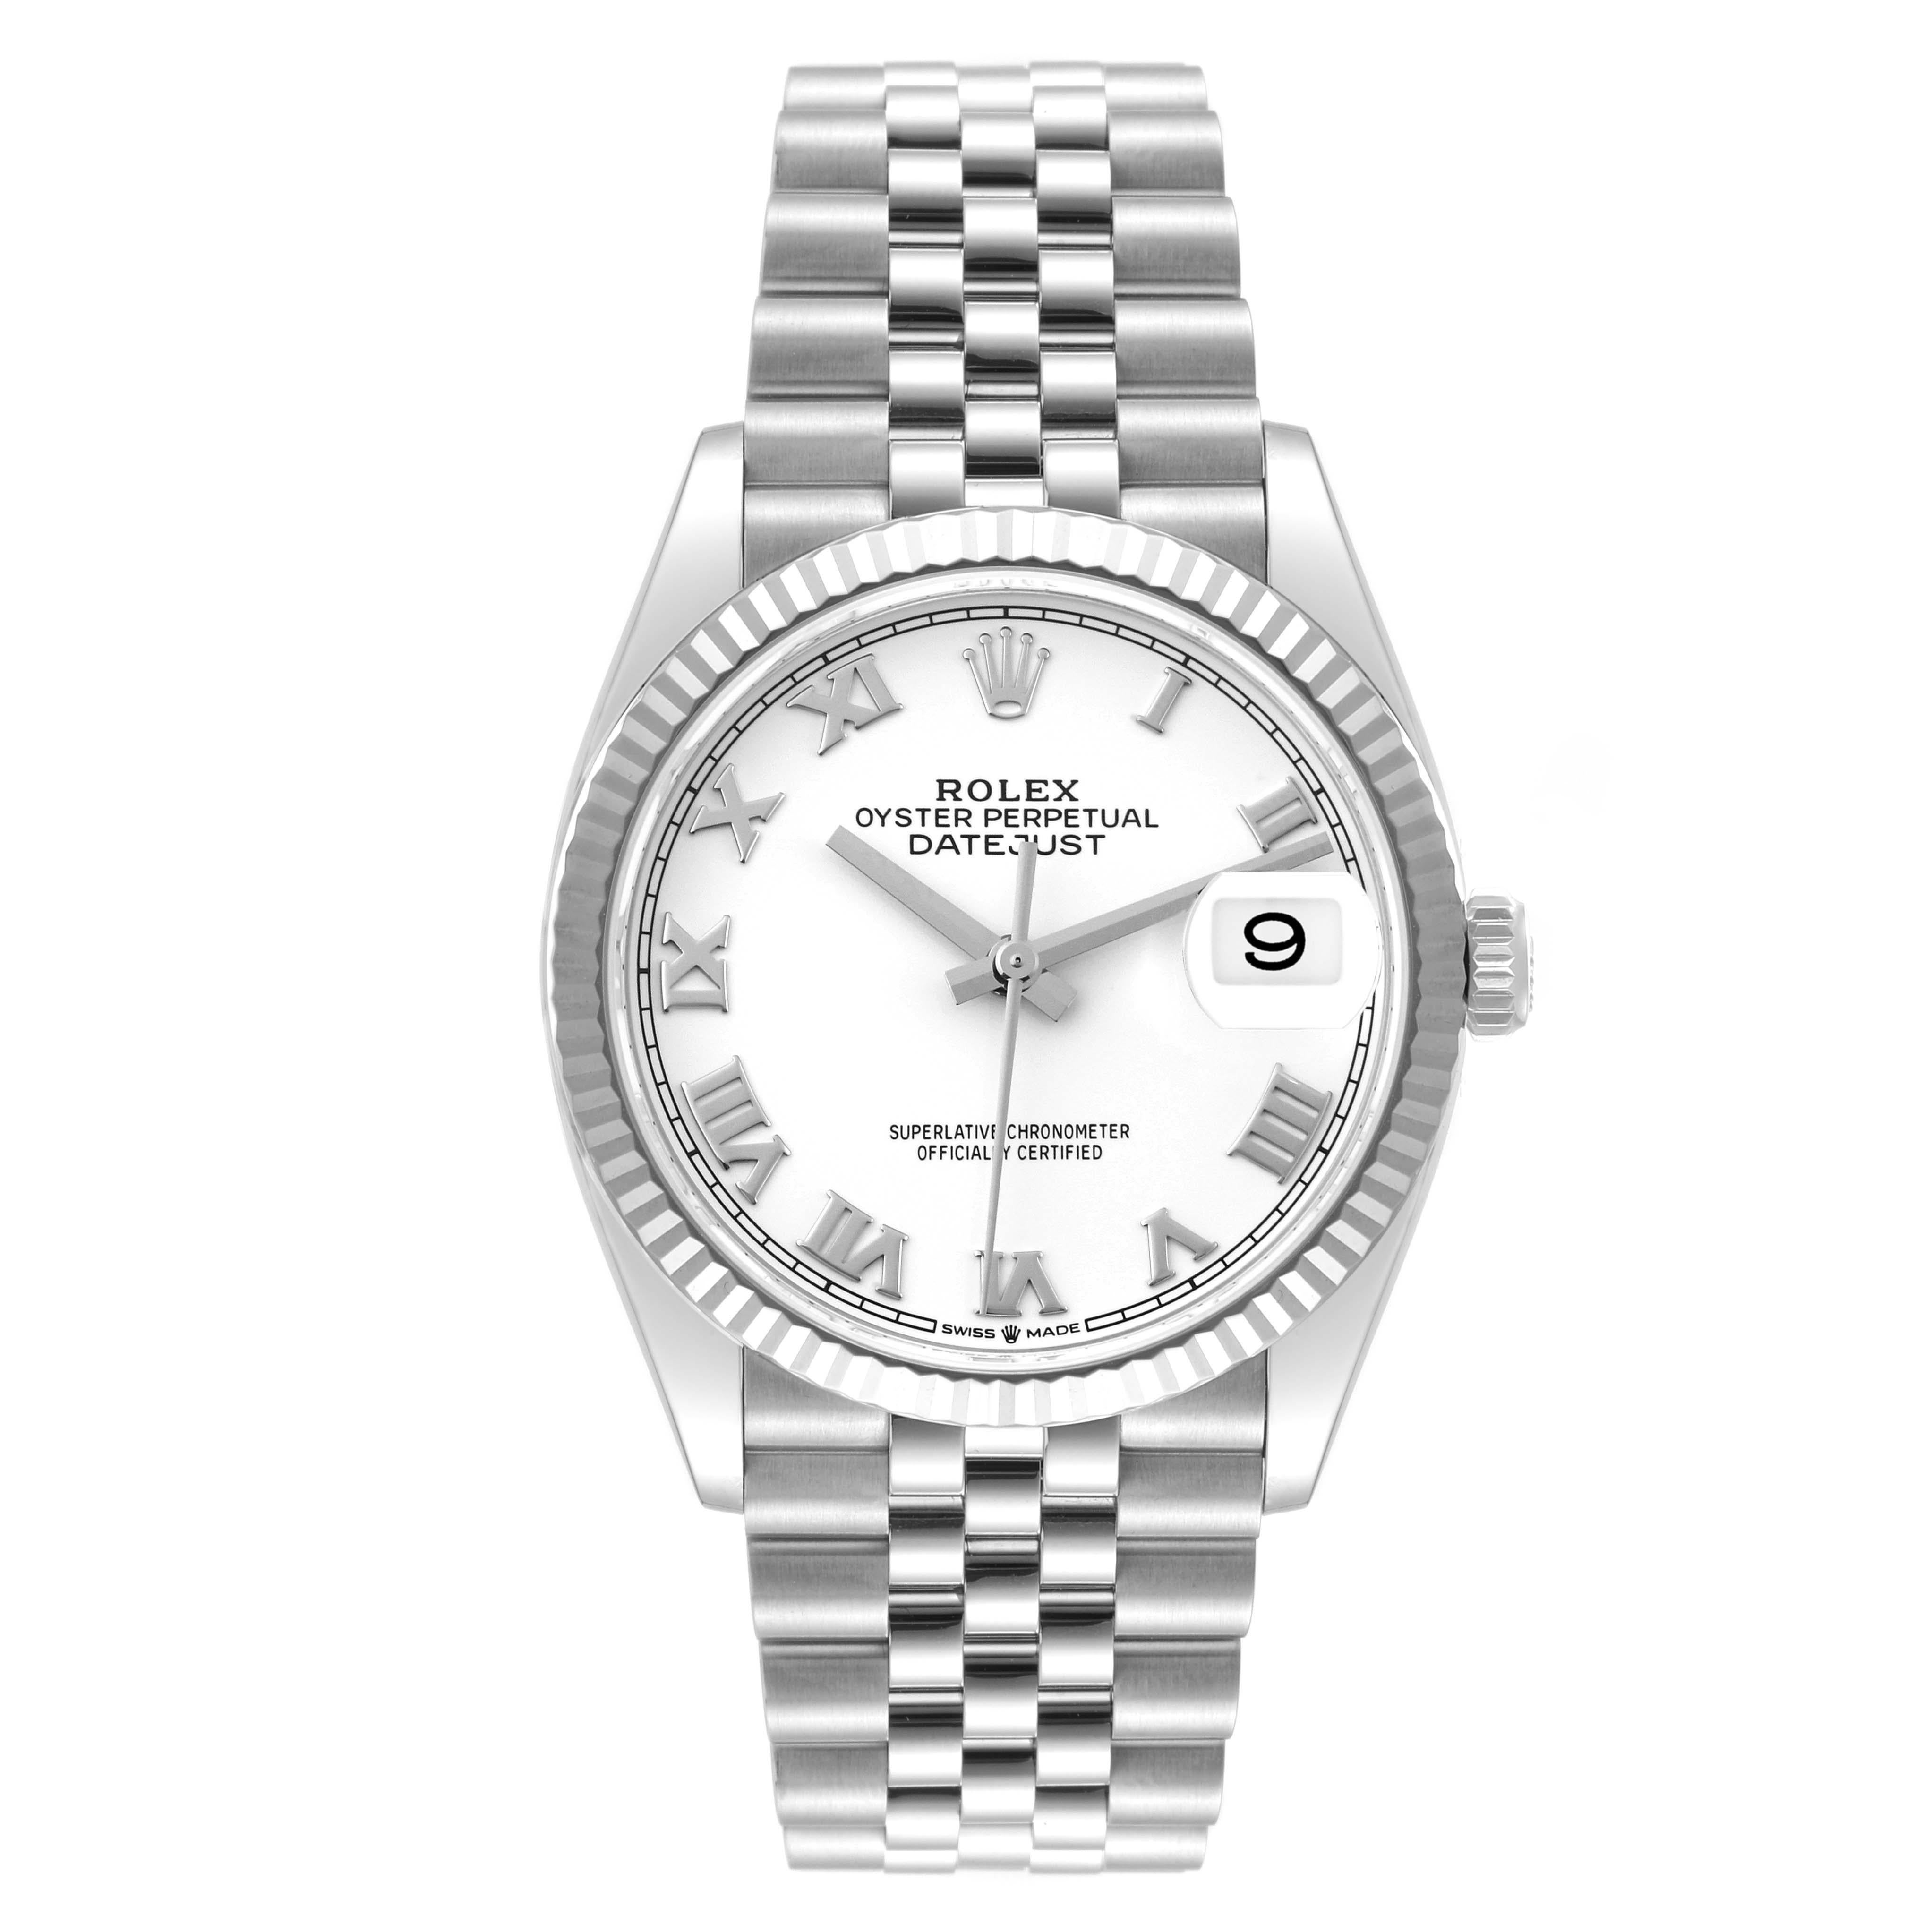 Rolex Datejust Steel White Gold White Dial Mens Watch 126234 Box Card. Officially certified chronometer autoamtic self-winding movement. Stainless steel case 36.0 mm in diameter.  Rolex logo on a crown. 18K white gold fluted bezel. Scratch resistant